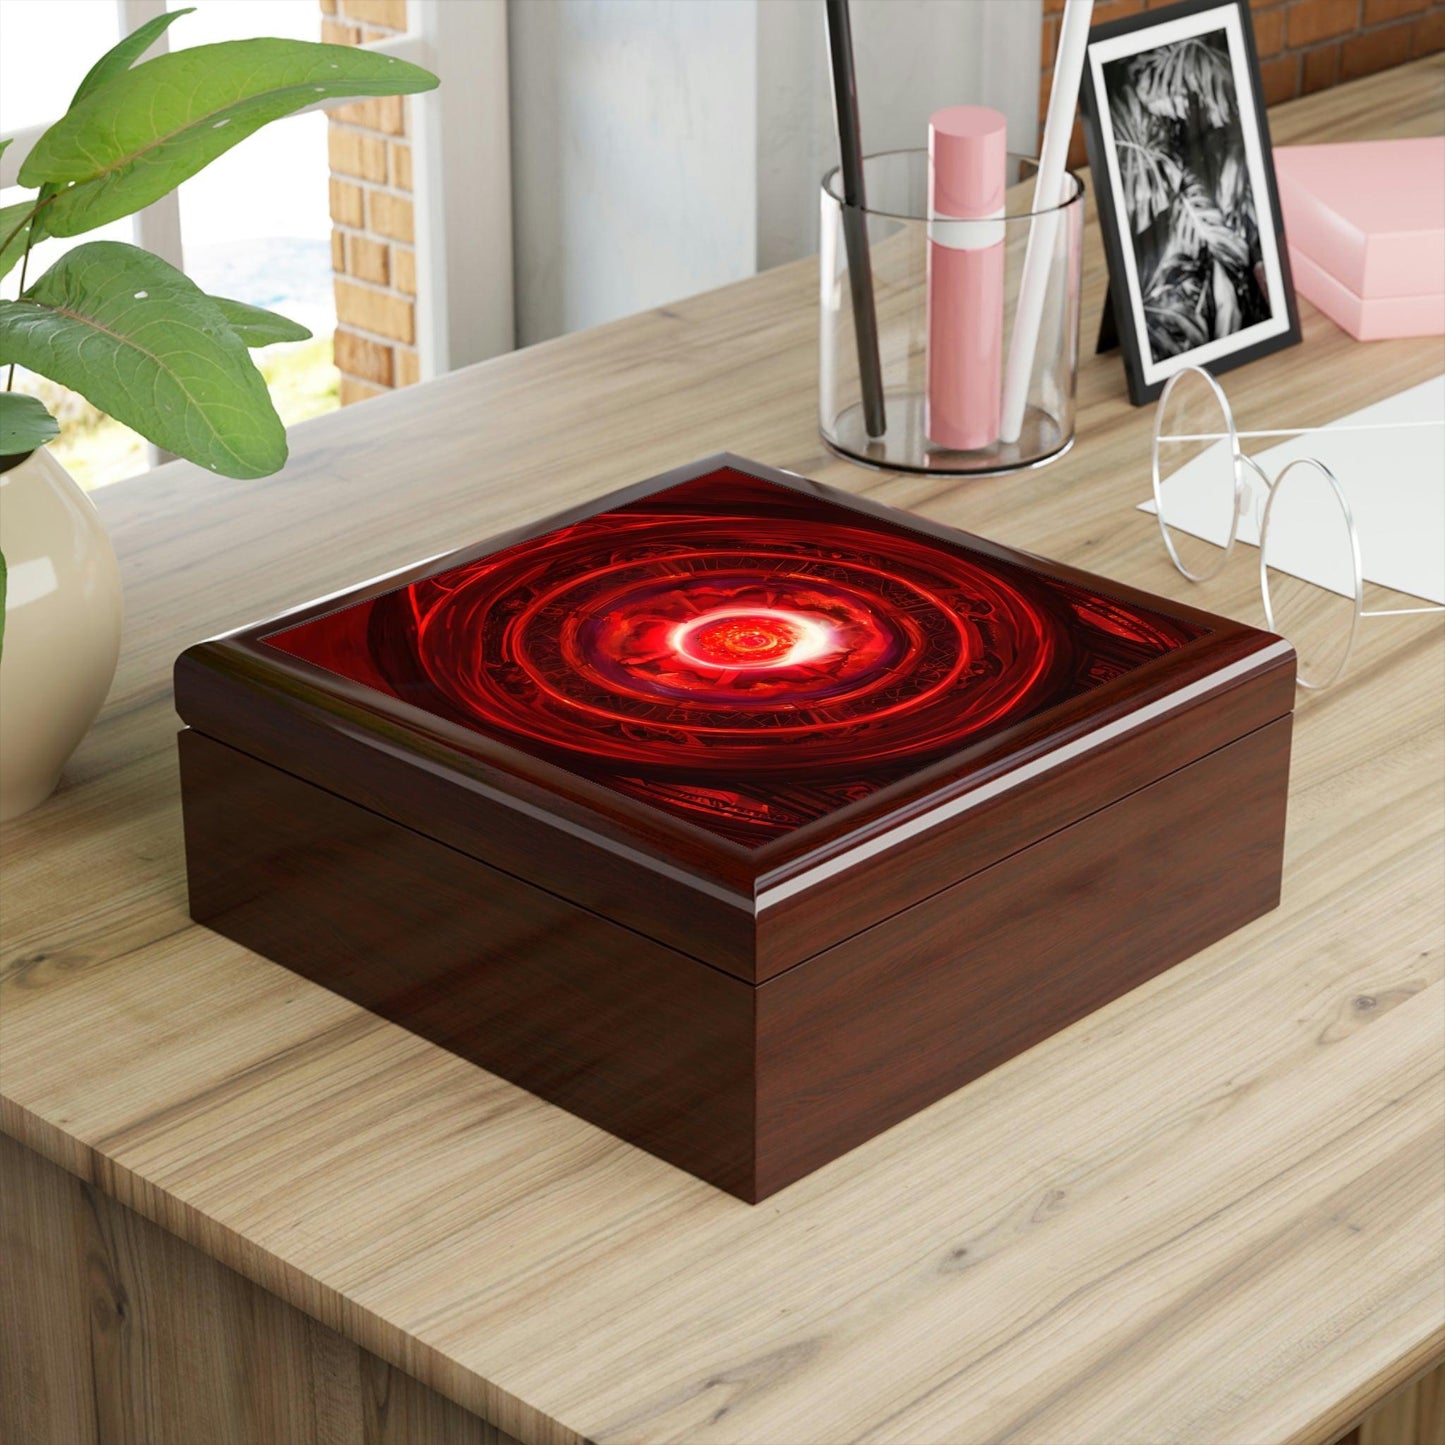 Red-Energy-Portal-Jewelry-Box-to-store-your-talismans-and-rings-8